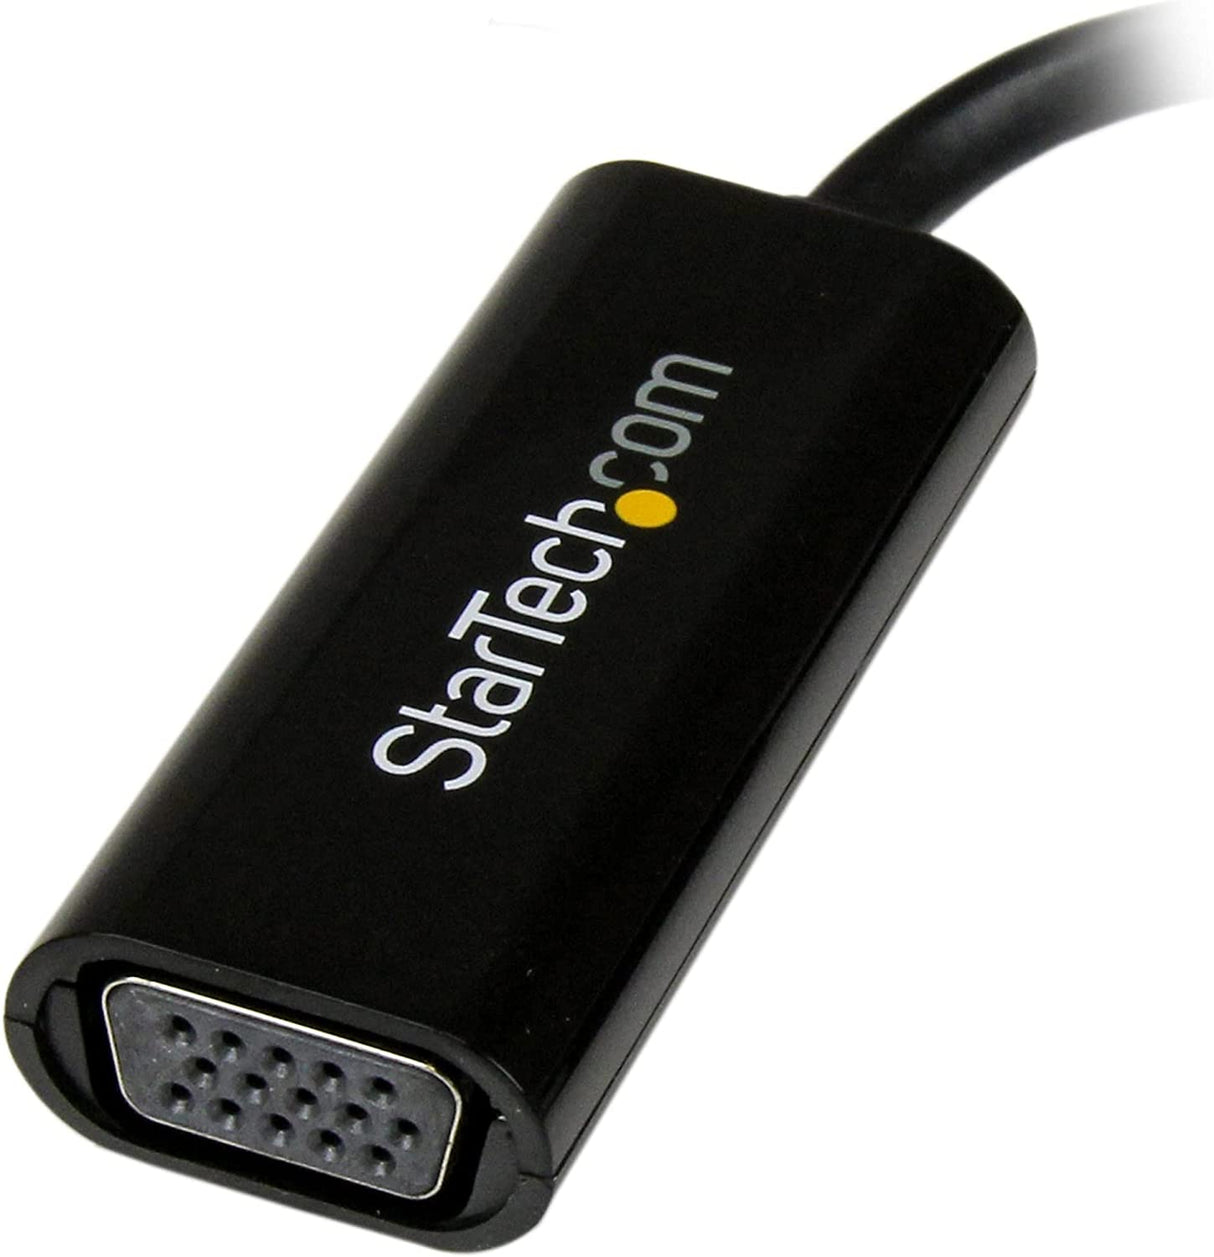 StarTech.com USB 3.0 to VGA Adapter - Slim Design - 1920x1200 - External Video &amp; Graphics Card - Multi-Monitor Display Adapter - Supports Windows (USB32VGAES)